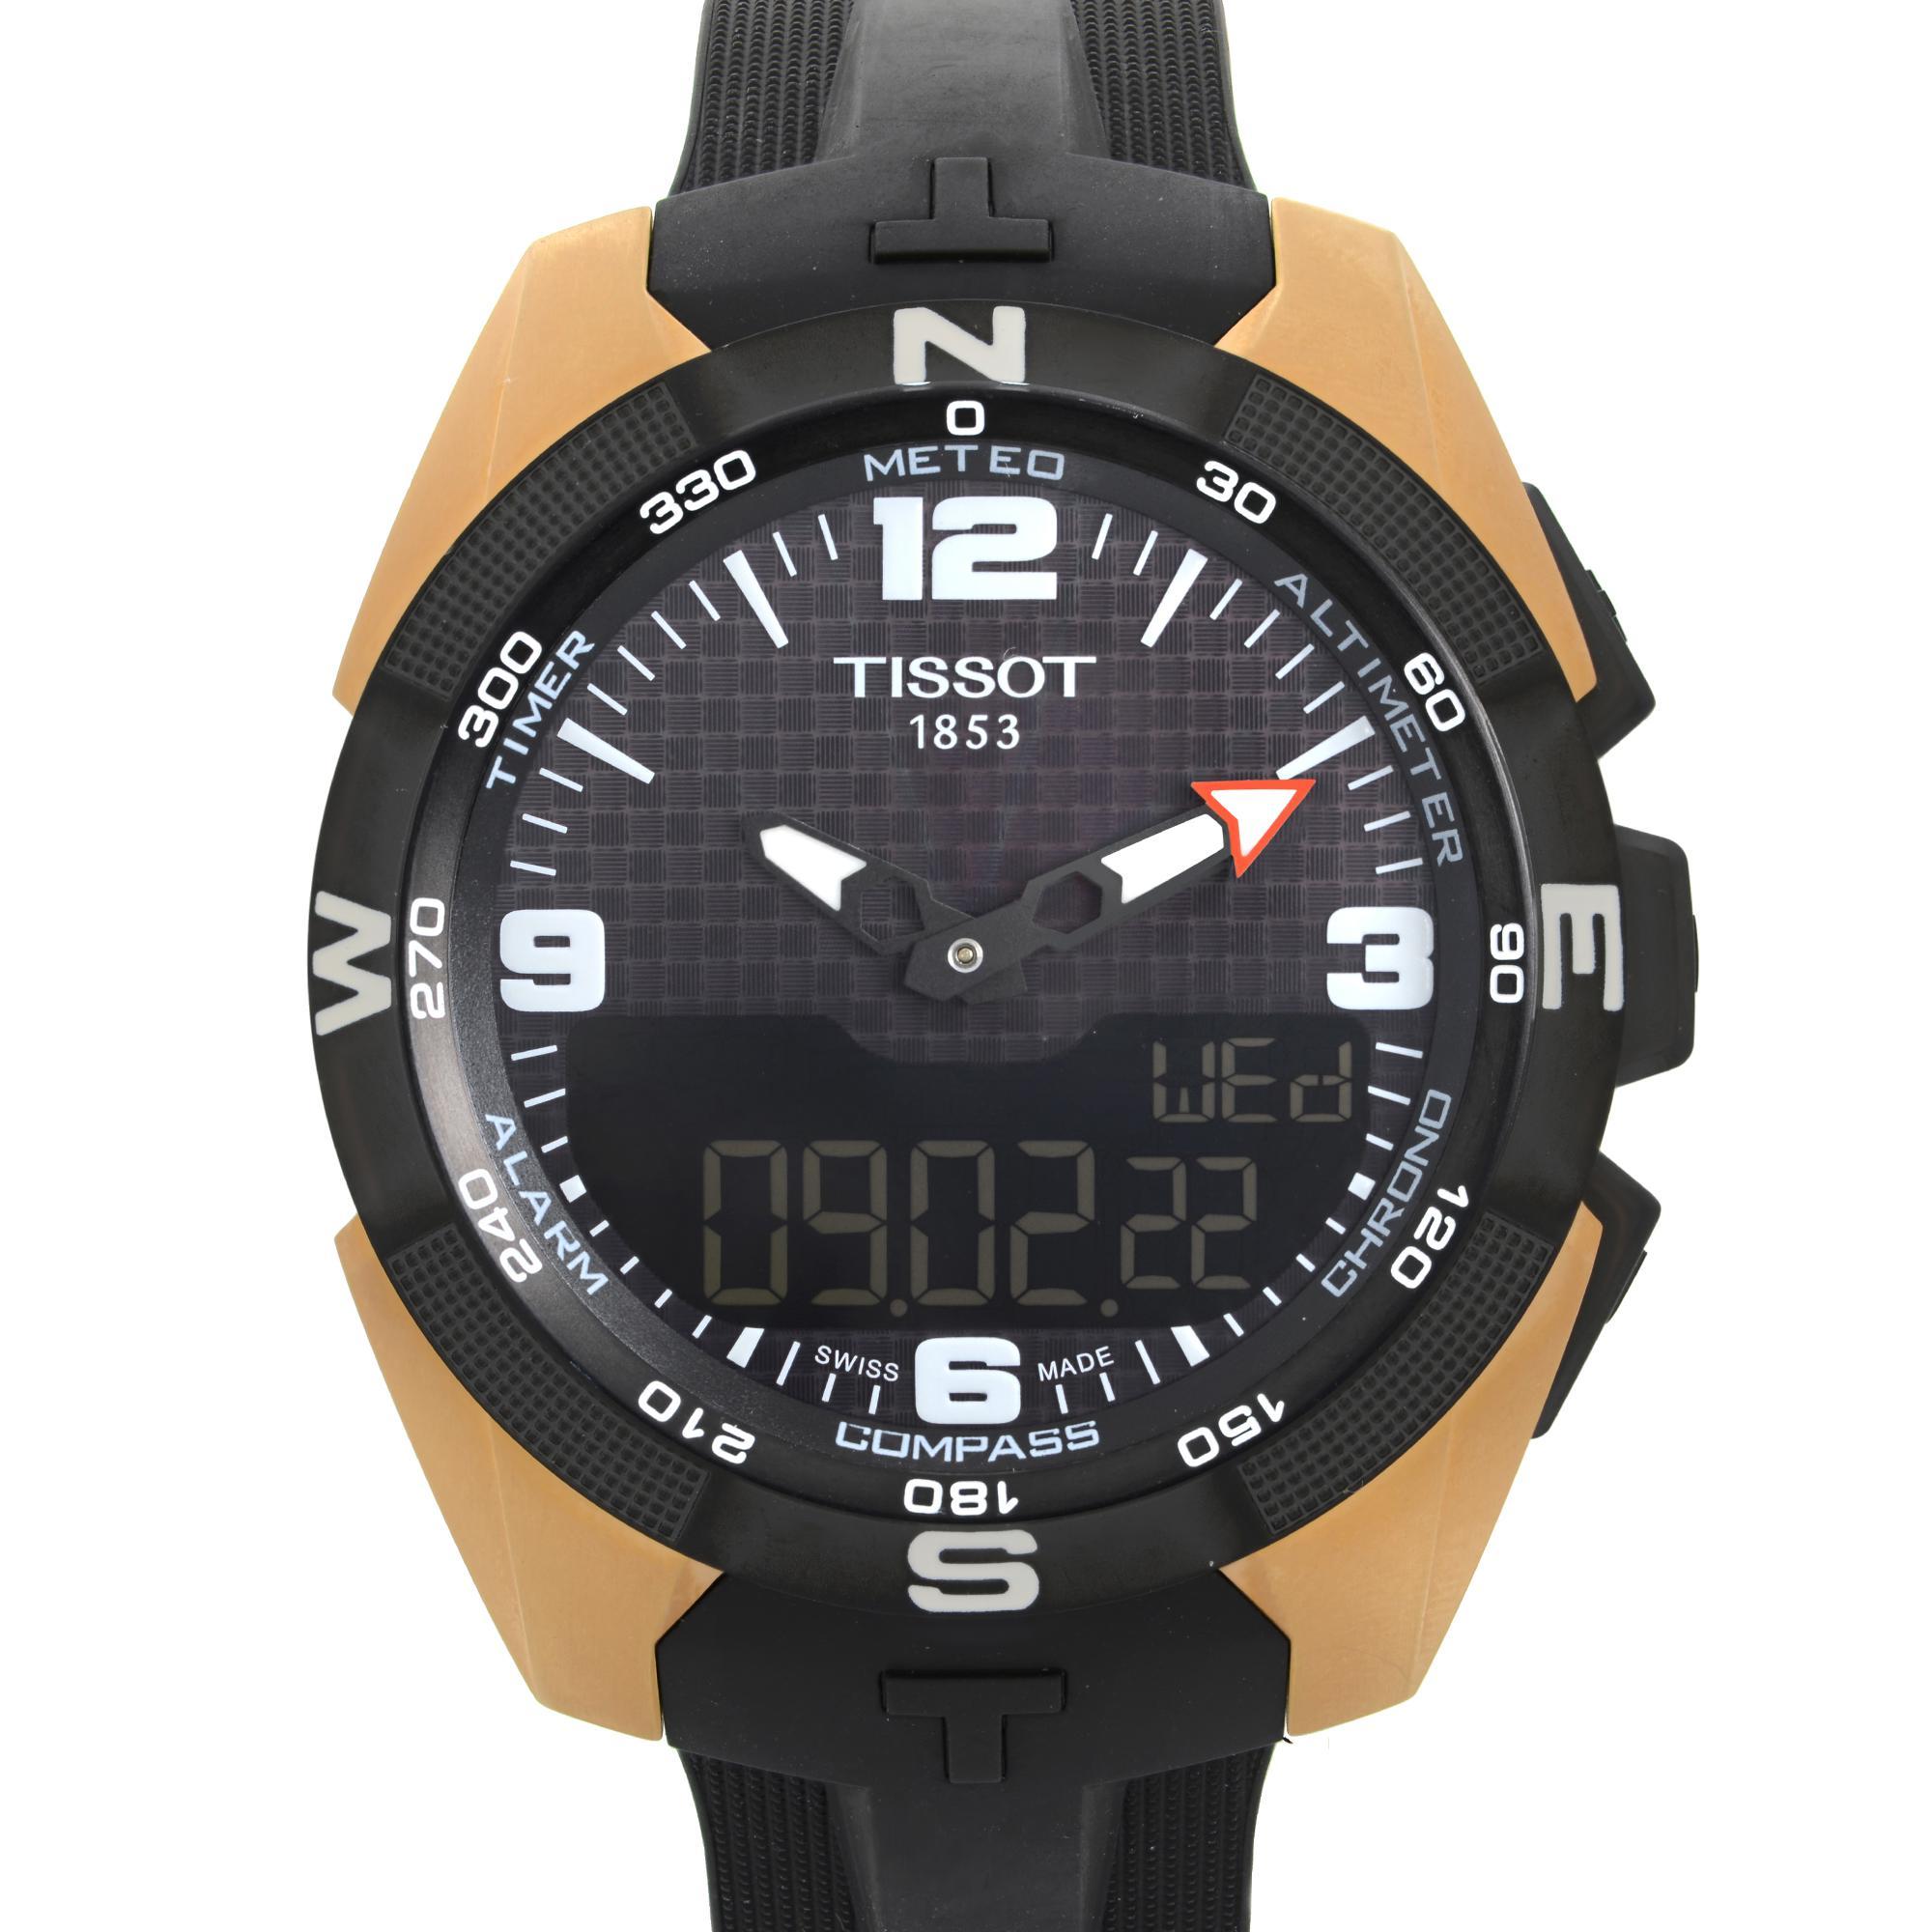 New with Defects Tissot T-Touch Expert Solar Men's Watch T091.420.47.207.00. The Watch has tiny scratches or other blemishes on the case. This Beautiful Timepiece is Powered by Quartz (Battery) Movement and Features: Round Rose Gold-Tone Titanium